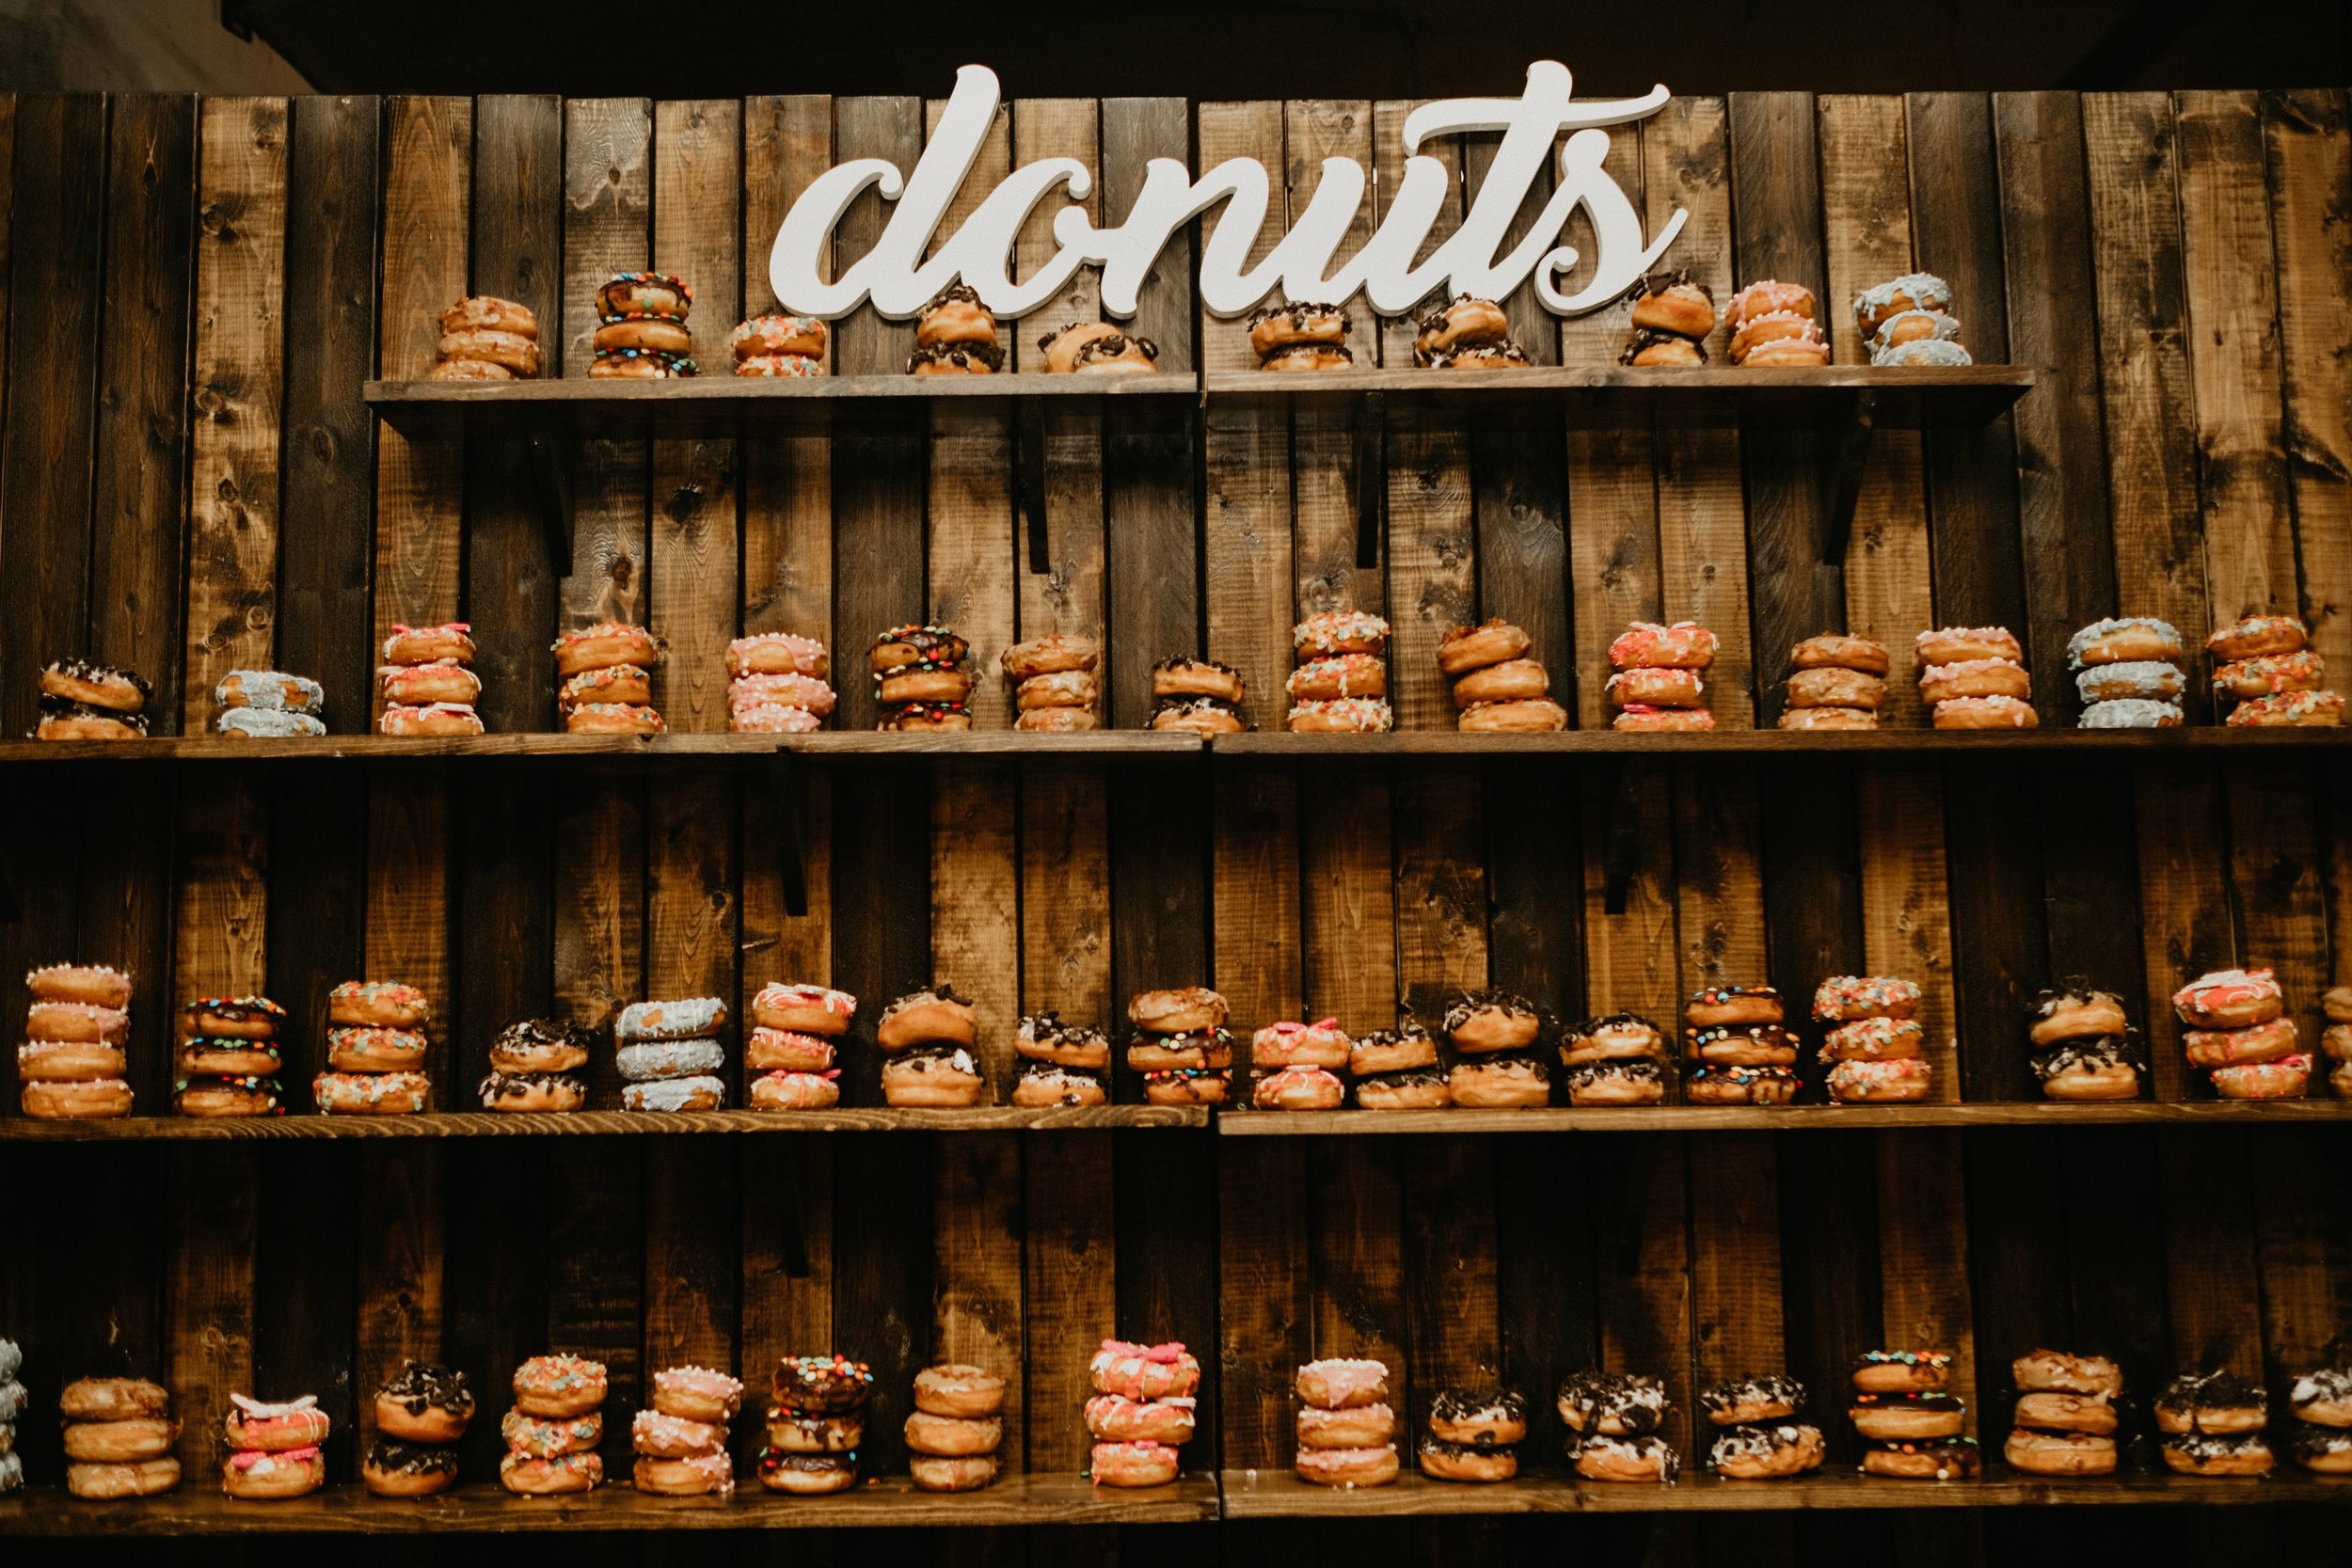 Our team created an art installation of love and sugar with the delicious confections from the Donut Bar.